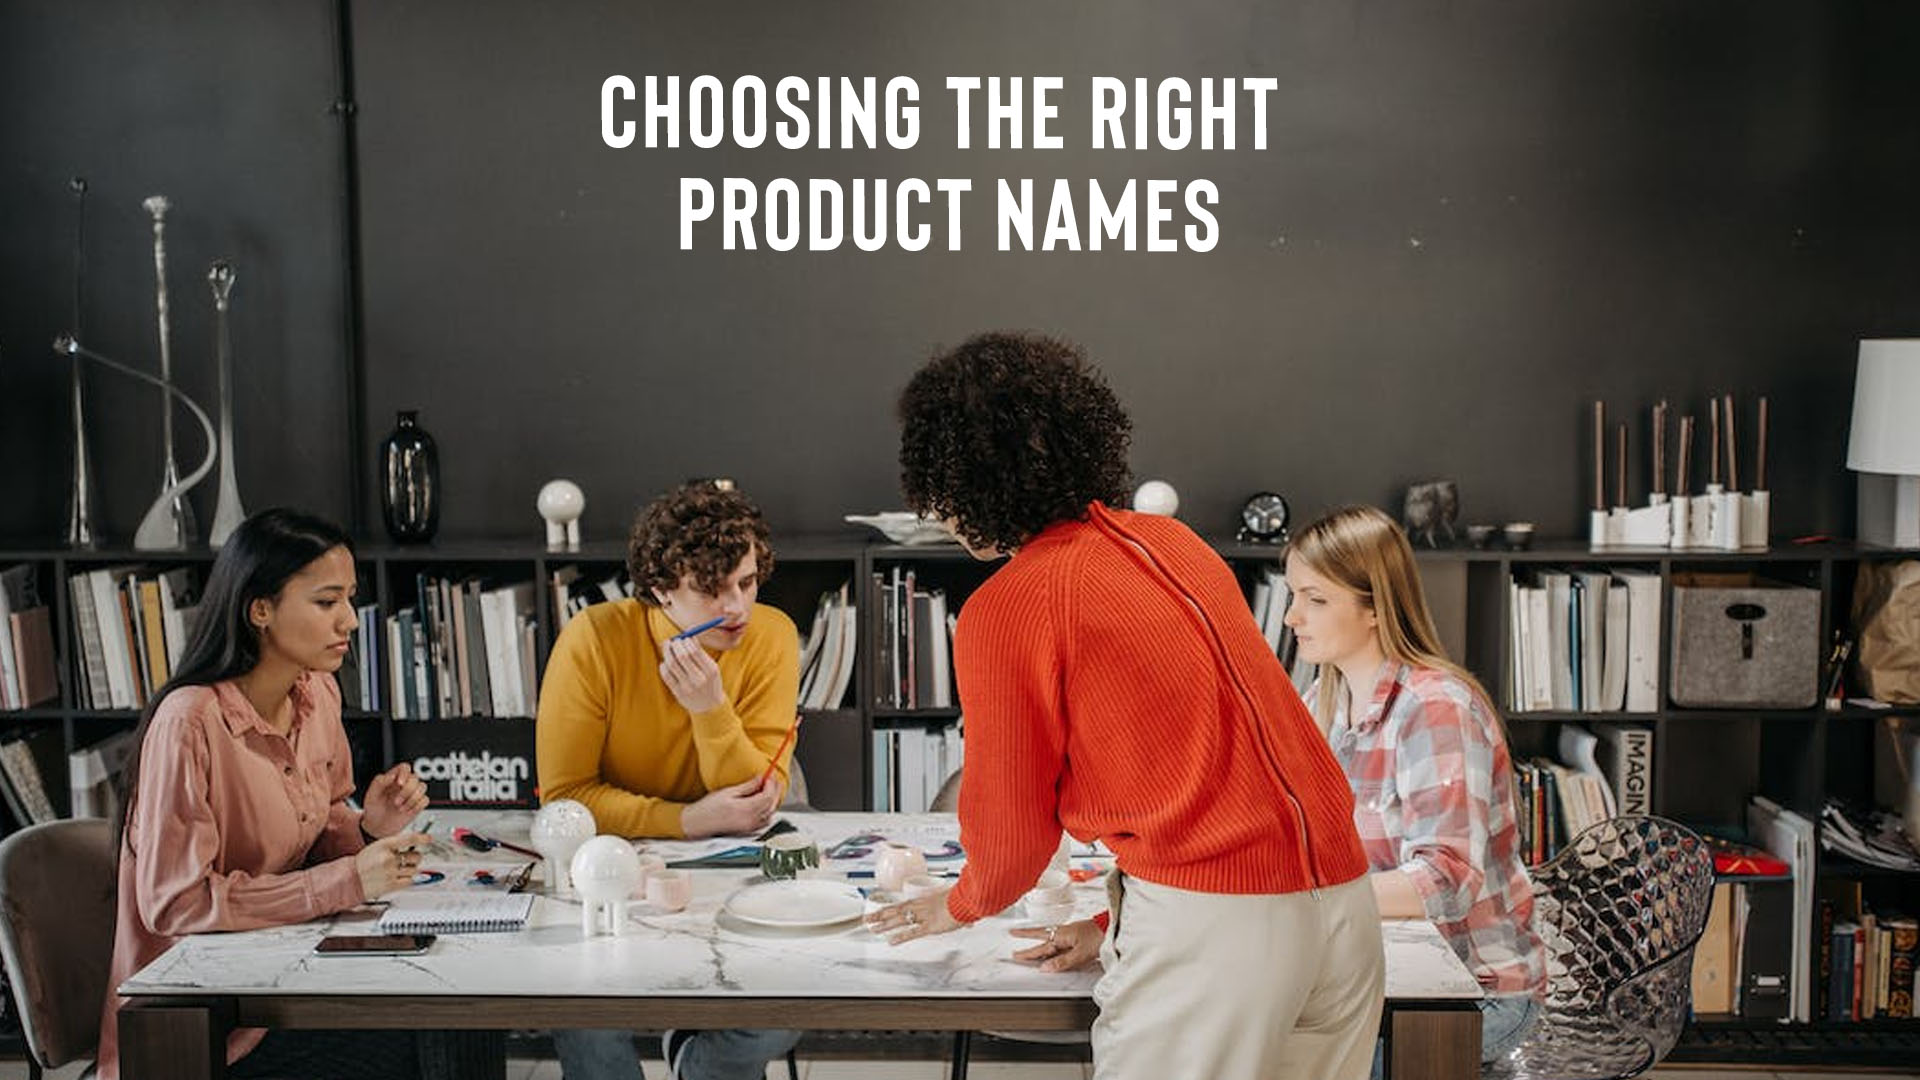 Choosing the right product names